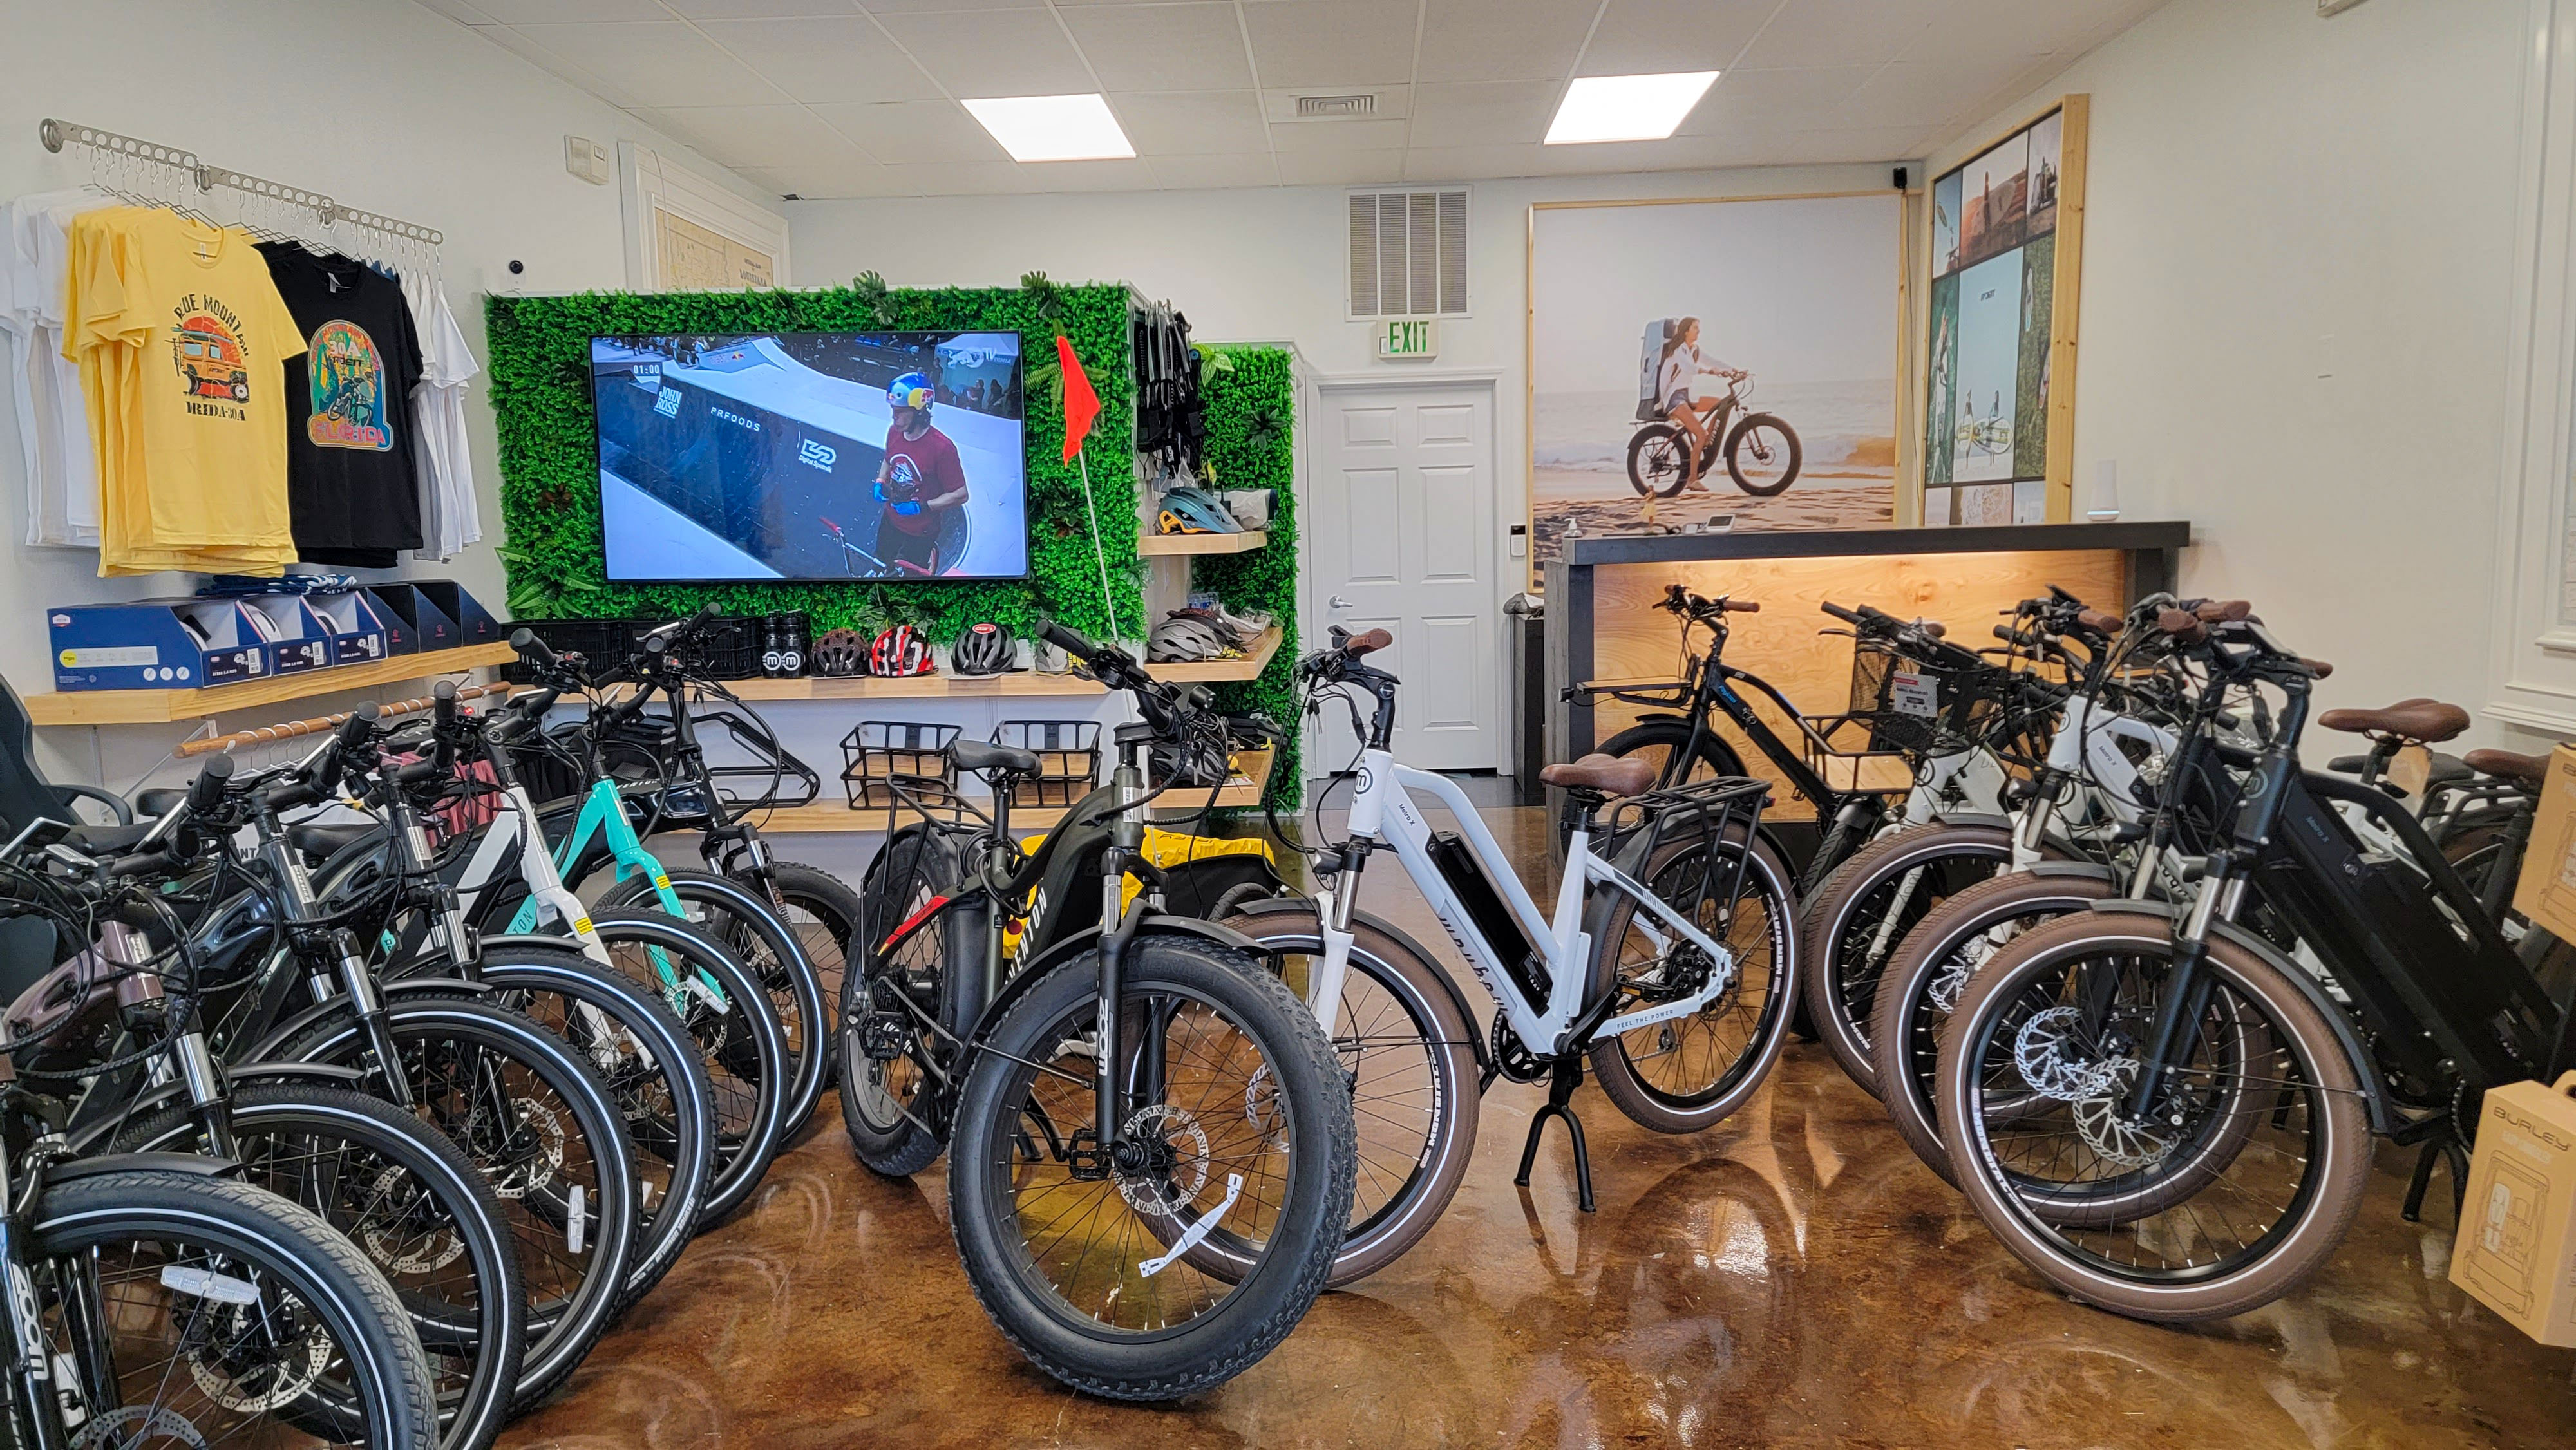 Electric Bikes, Bike, E-Scooters and Paddleboards Sales and Rentals in Santa Rosa Beach, FL 30A